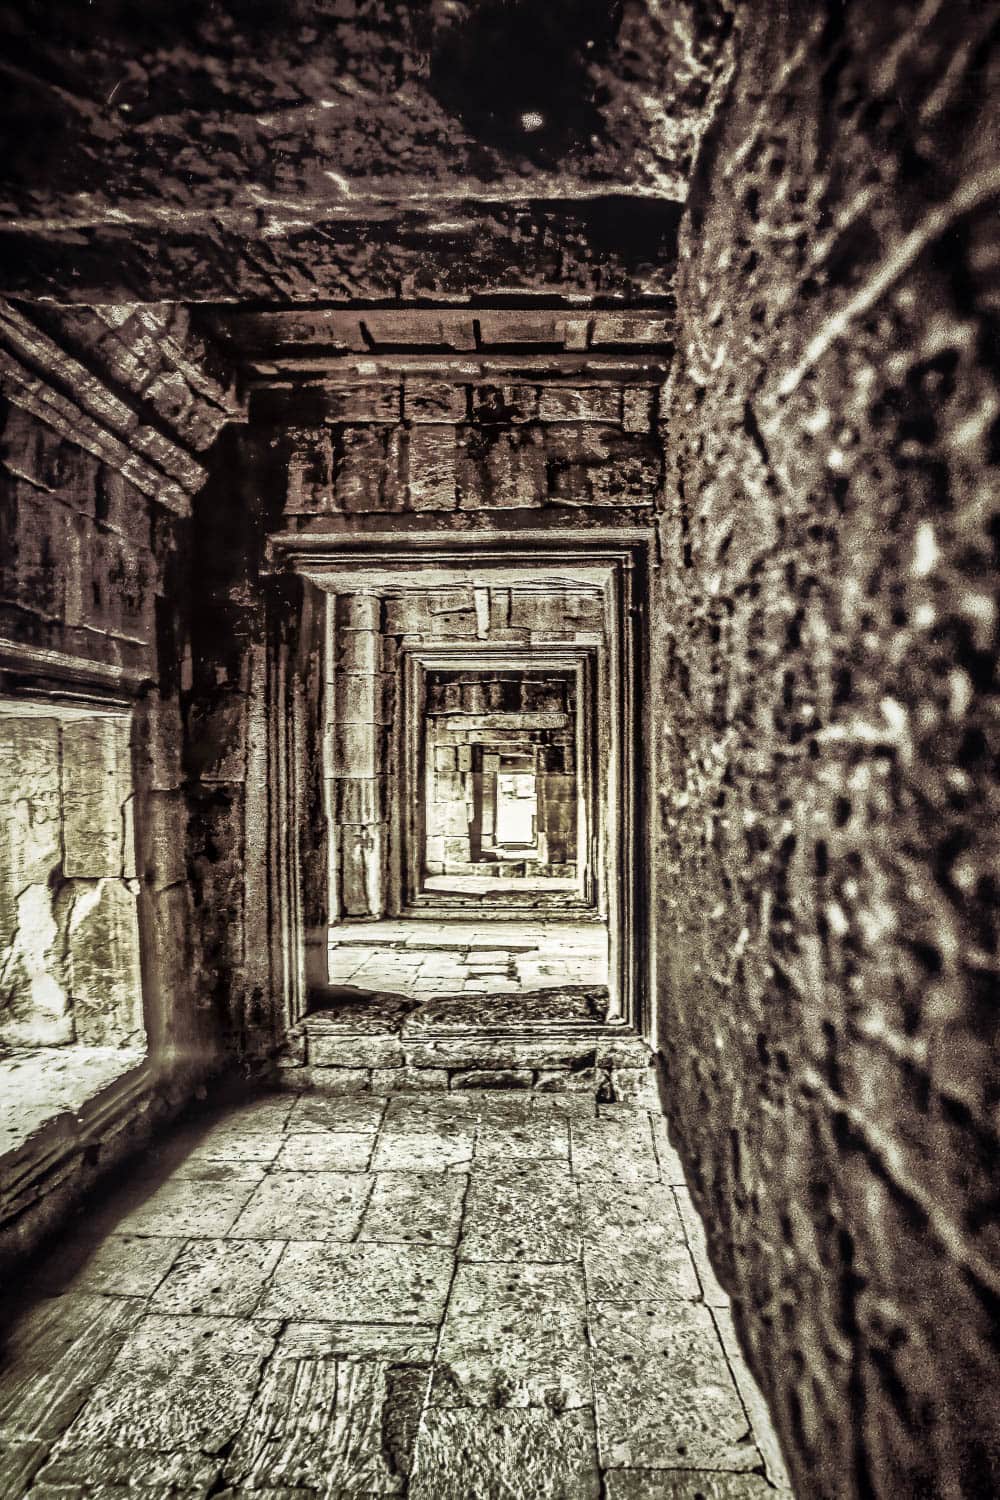 A corridor in one of the temples of the Angkor Wat complex processed in Skylum Luminar 4